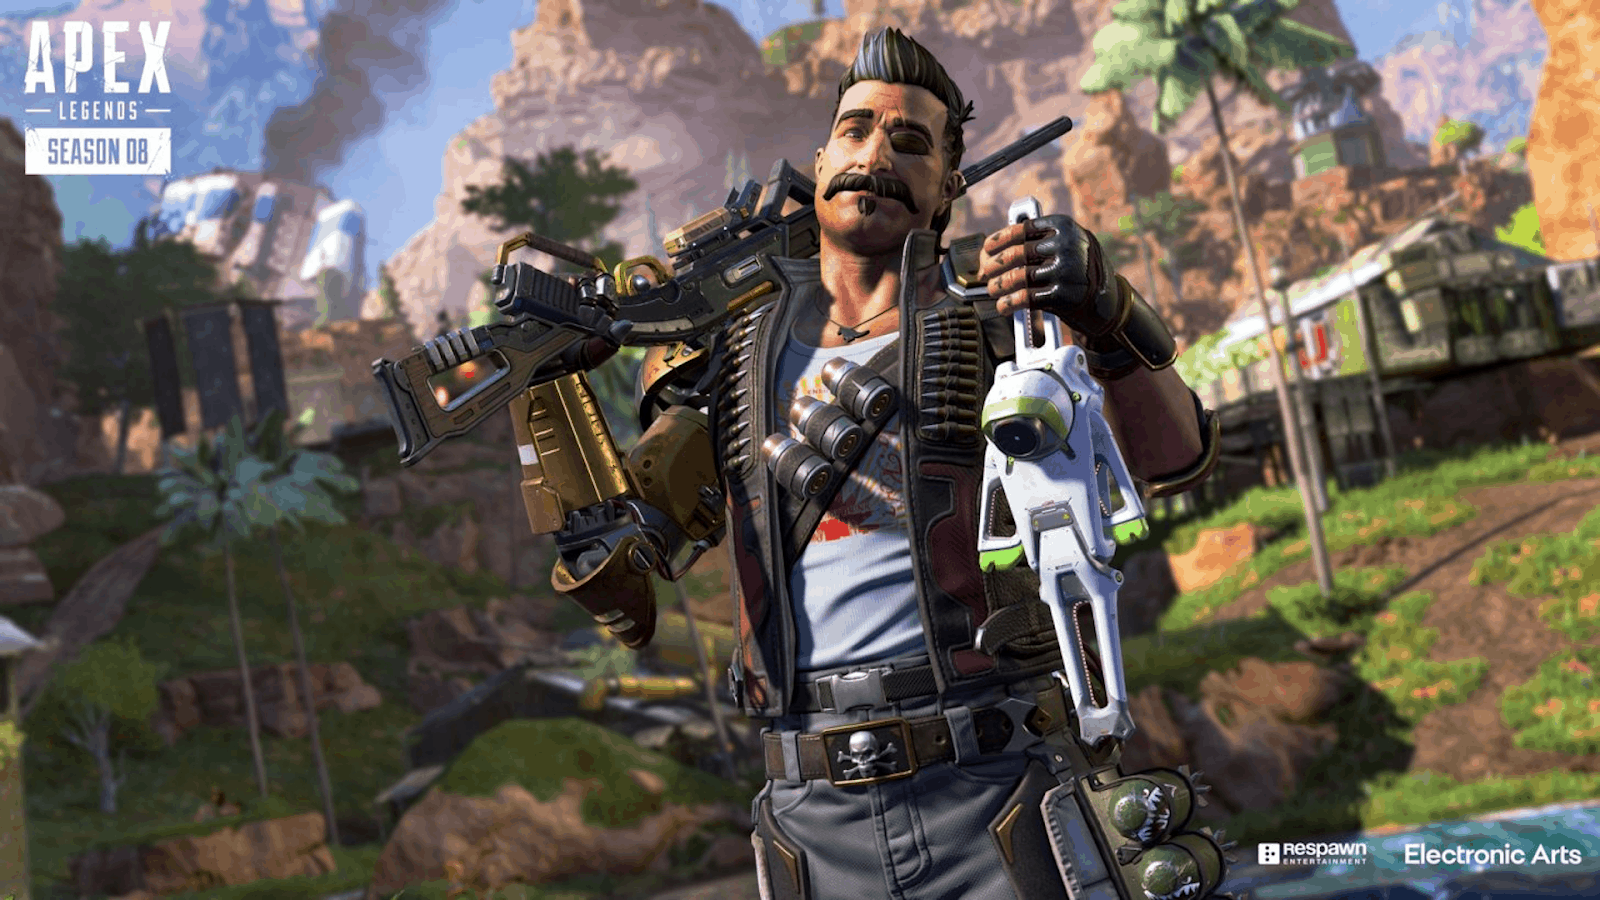 Apex Legends’ Players Call Out for ‘No Apex August’ Strike Amidst Game’s Broken State